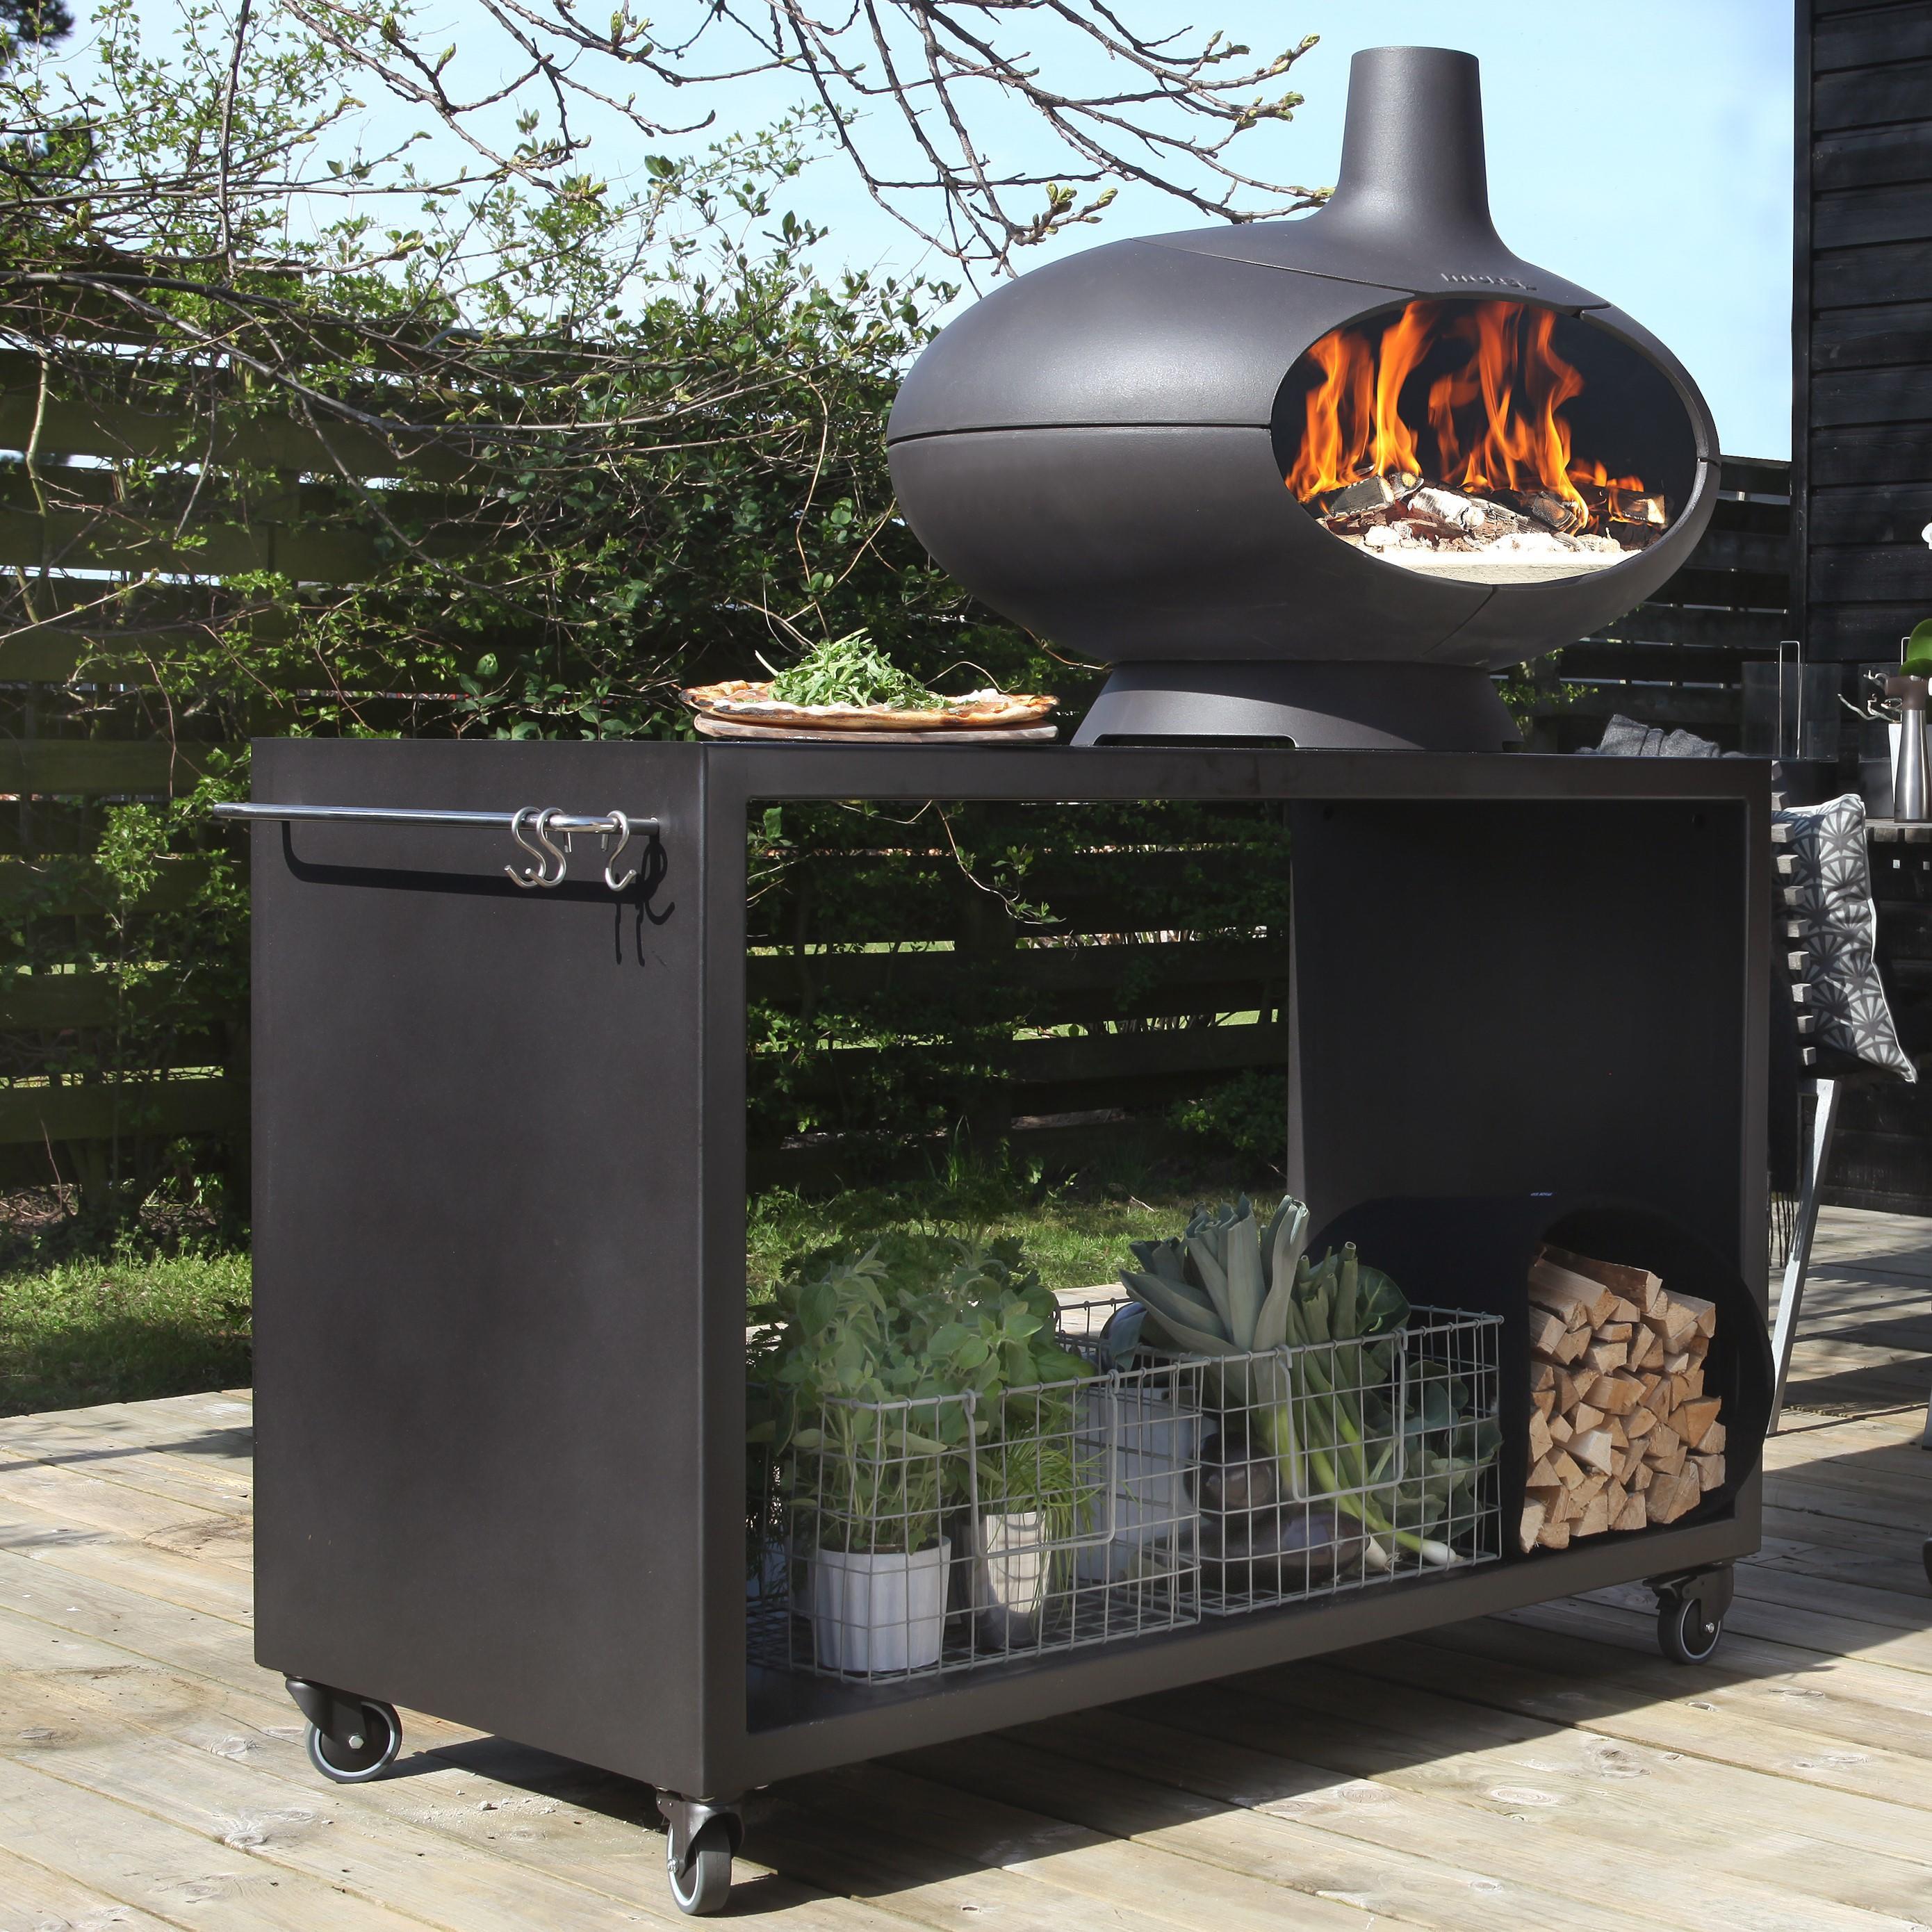 Morso Forno on Large Outdoor Table